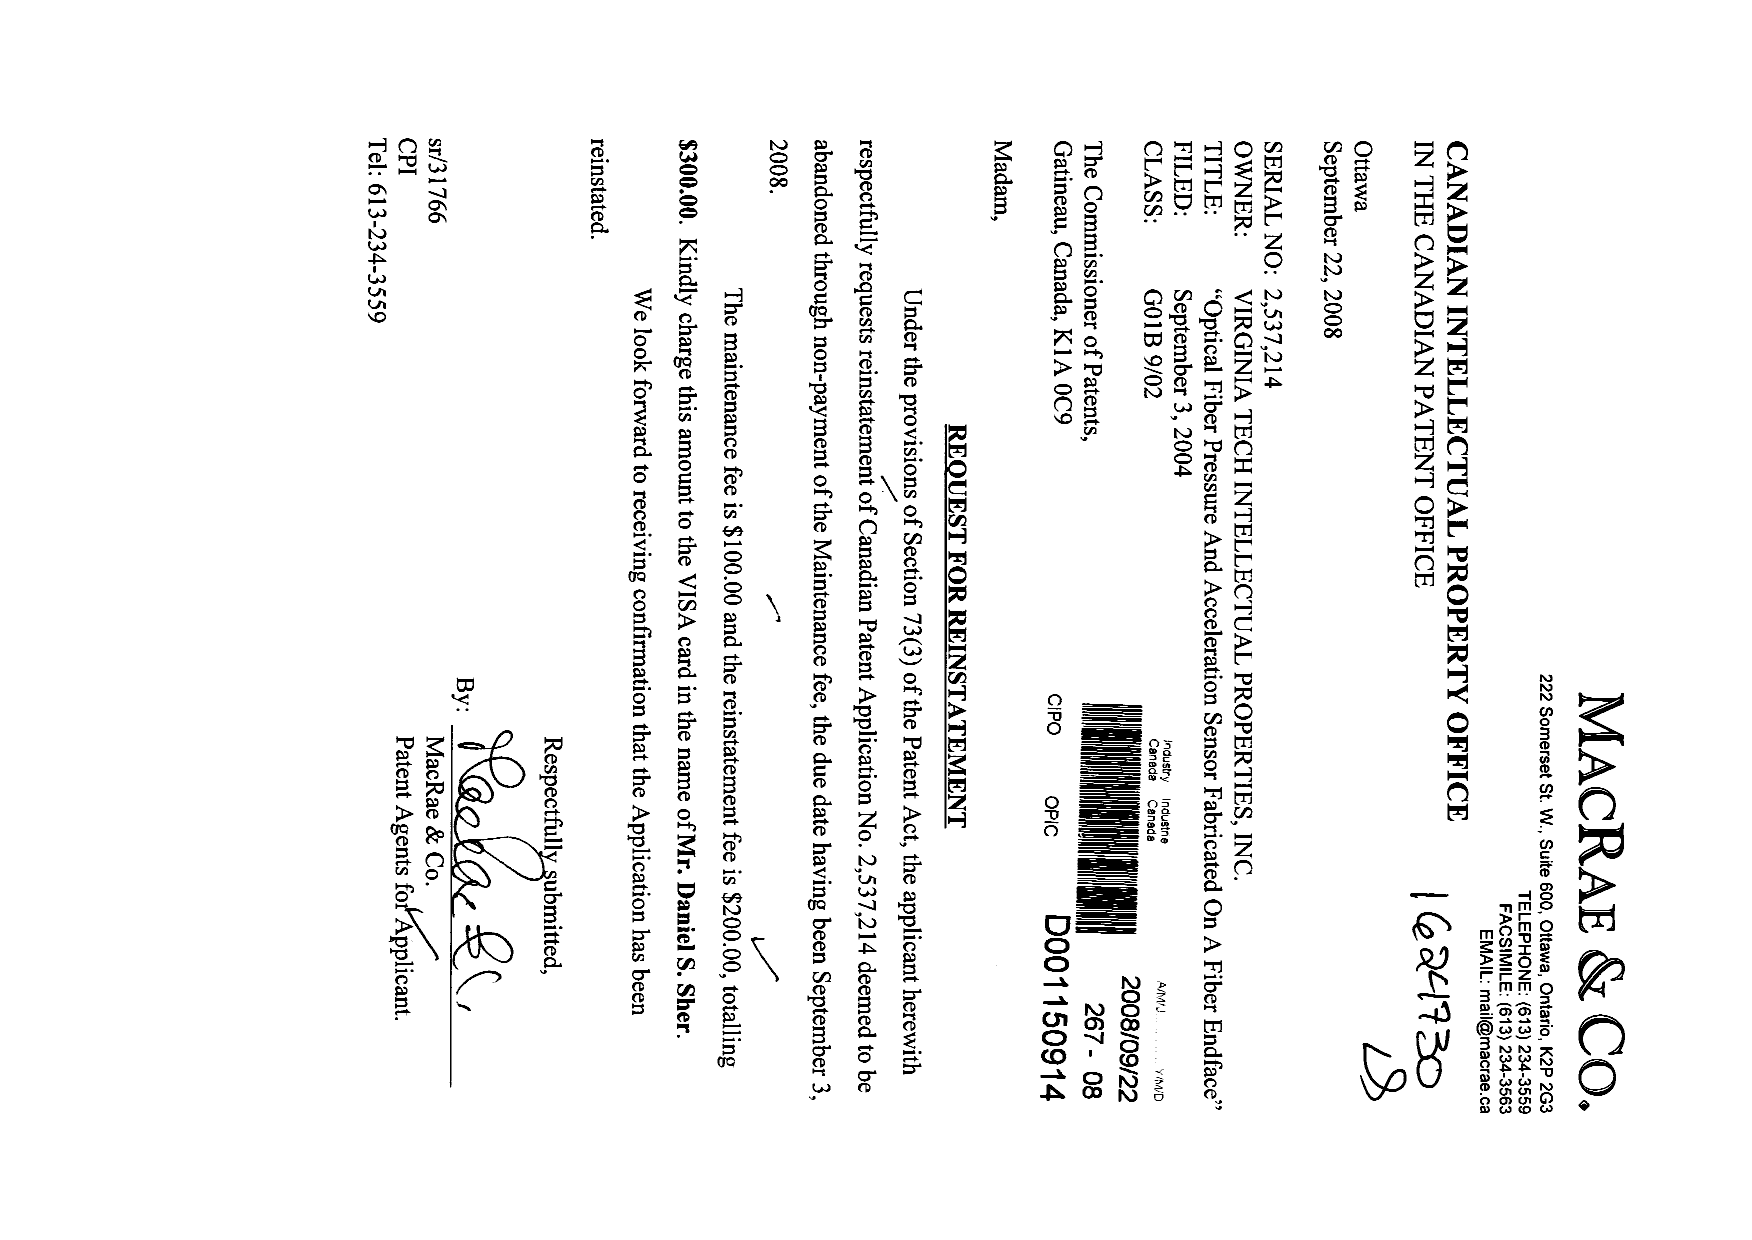 Canadian Patent Document 2537214. Fees 20080922. Image 1 of 1